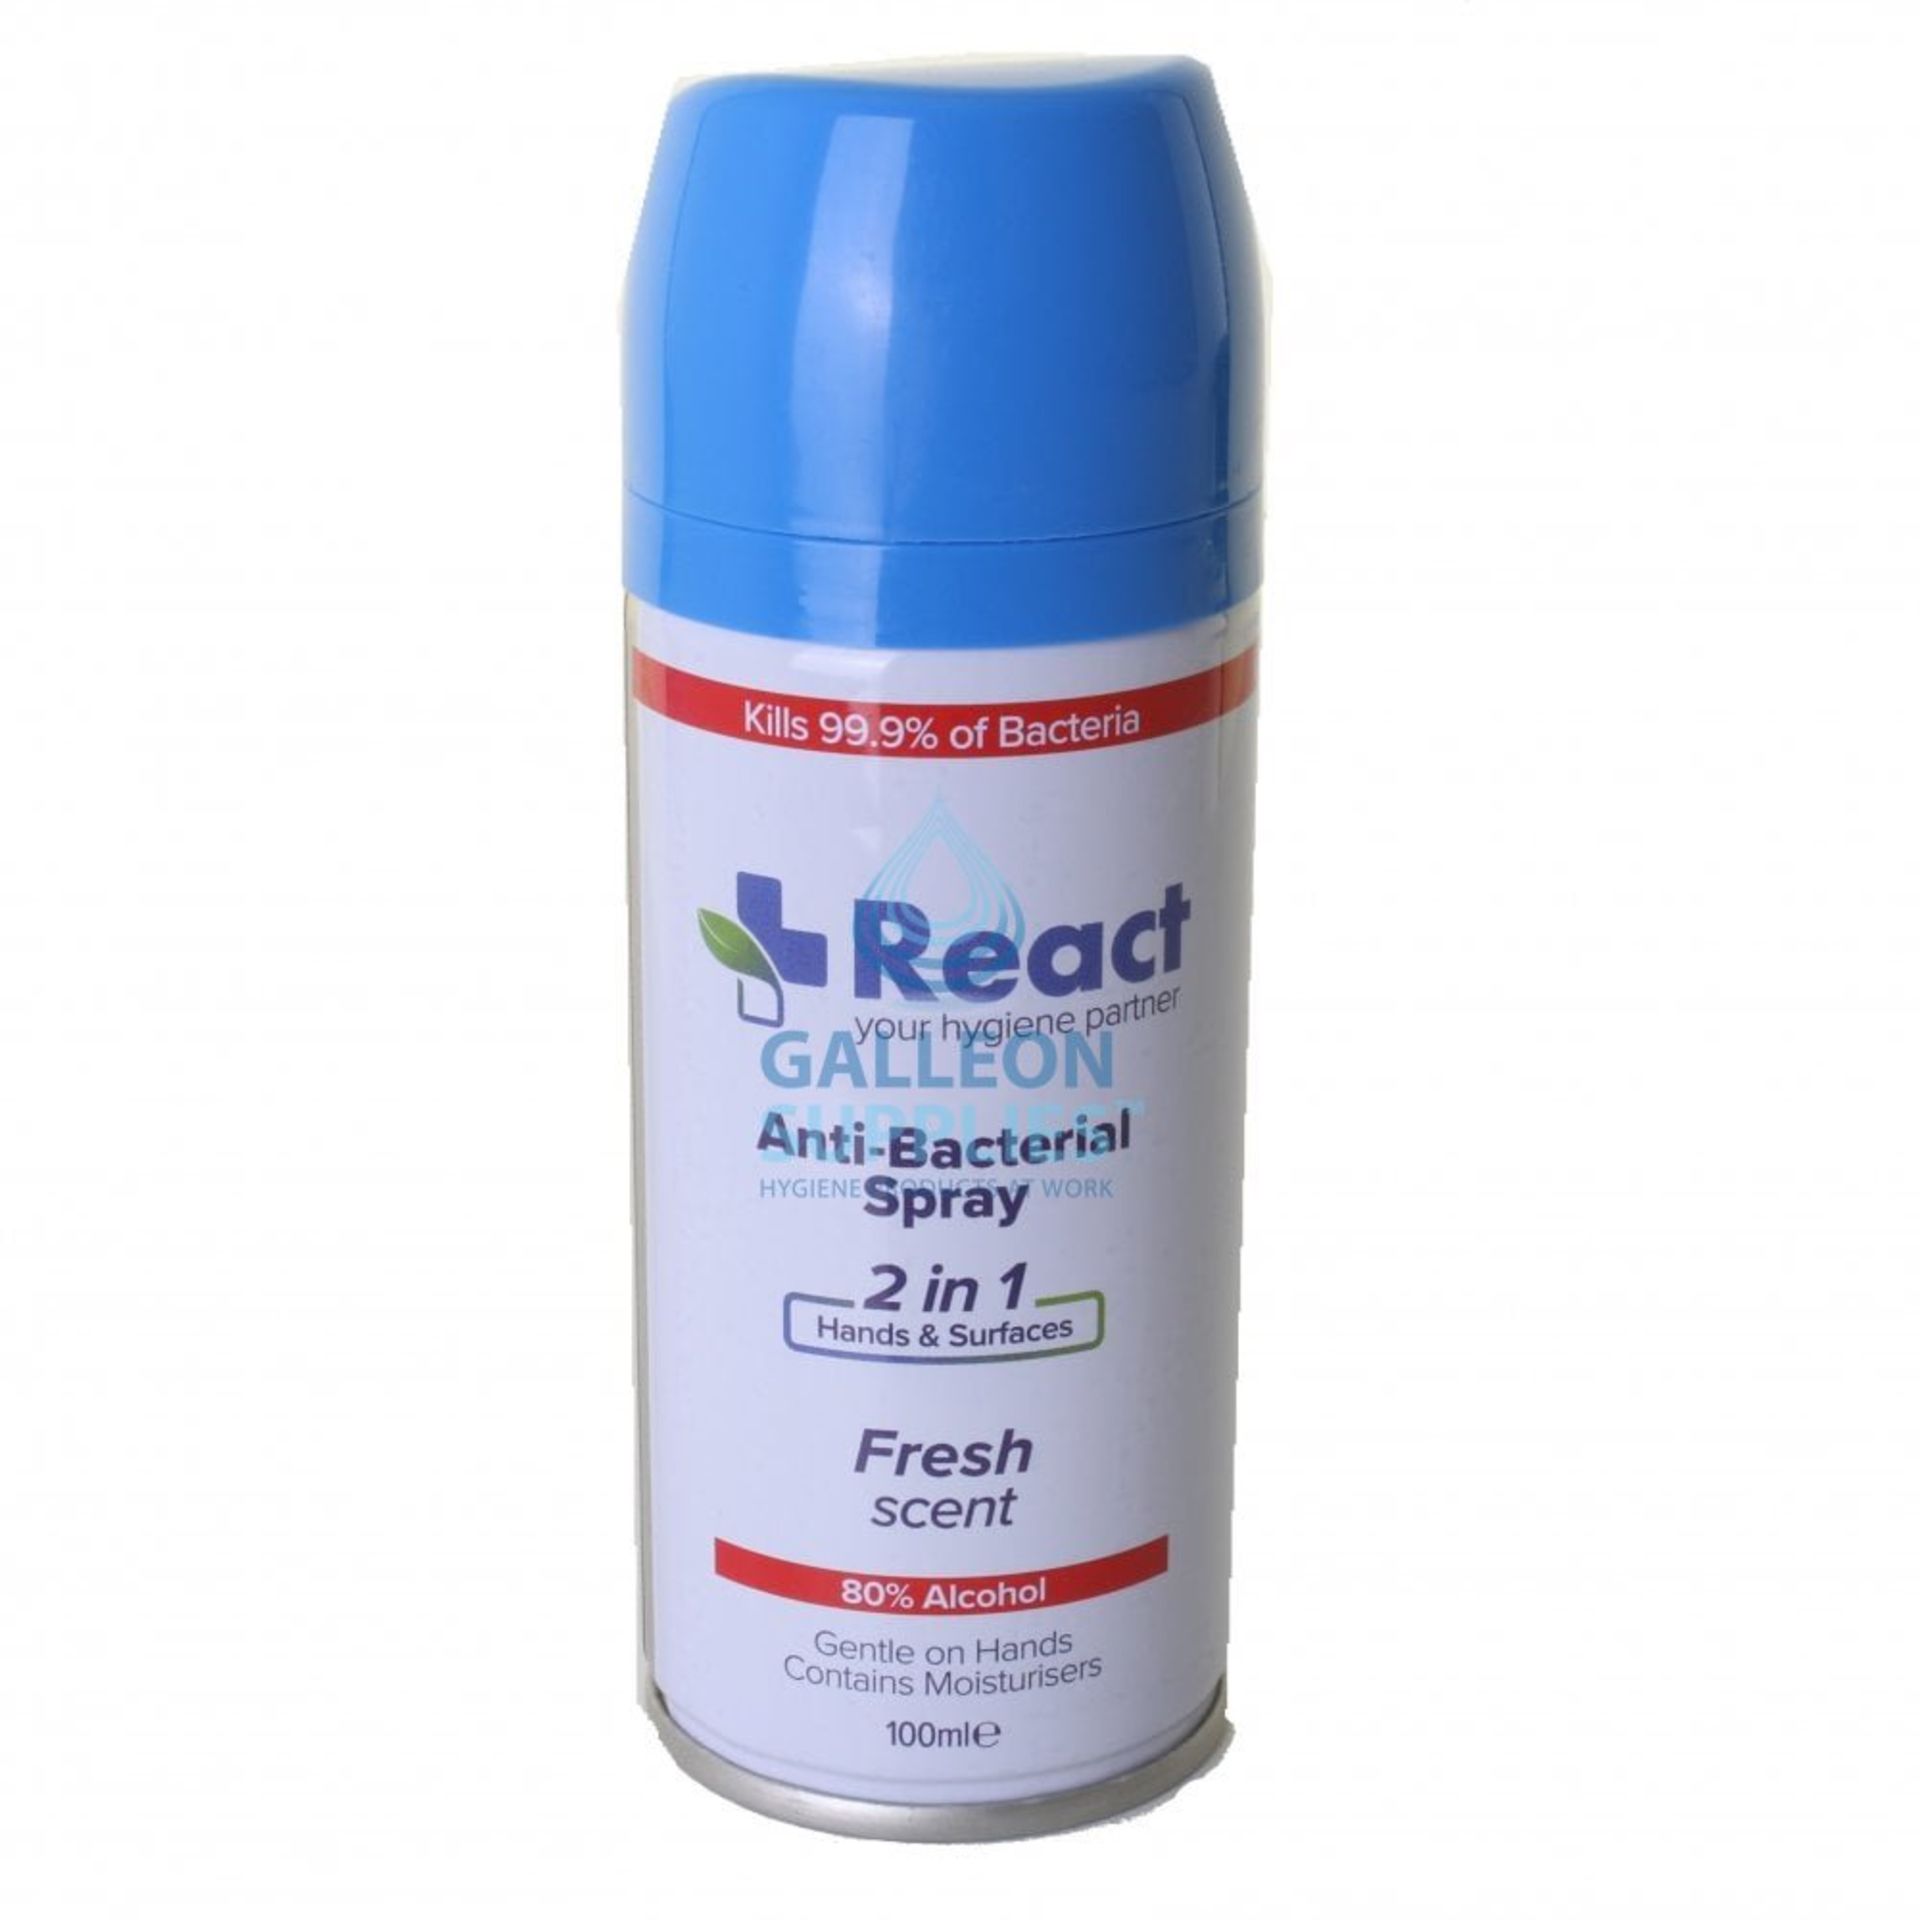 Pallet To Contain 4,800 X React Antibacterial Spray 100ml. RRP £3.59 each, giving this lot a total